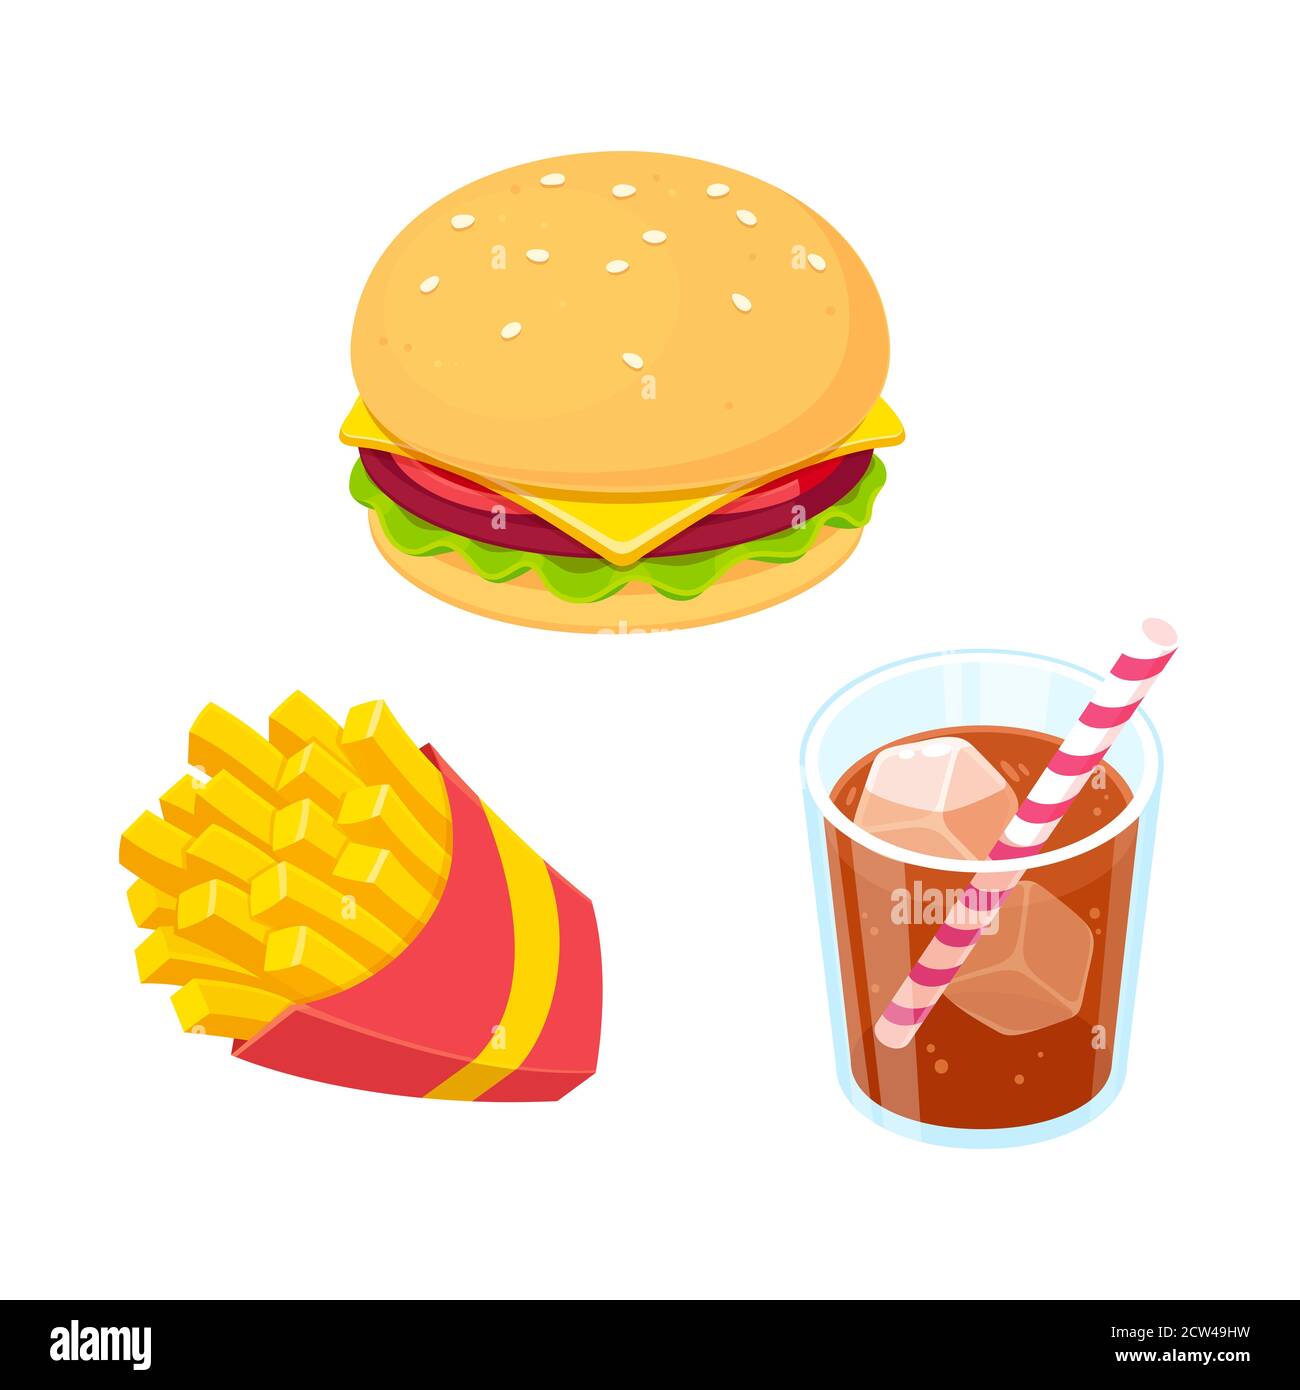 Cartoon fast food icon set. French fries, burger and glass of soda drink. Realistic colorful vector clip art illustration. Stock Vector